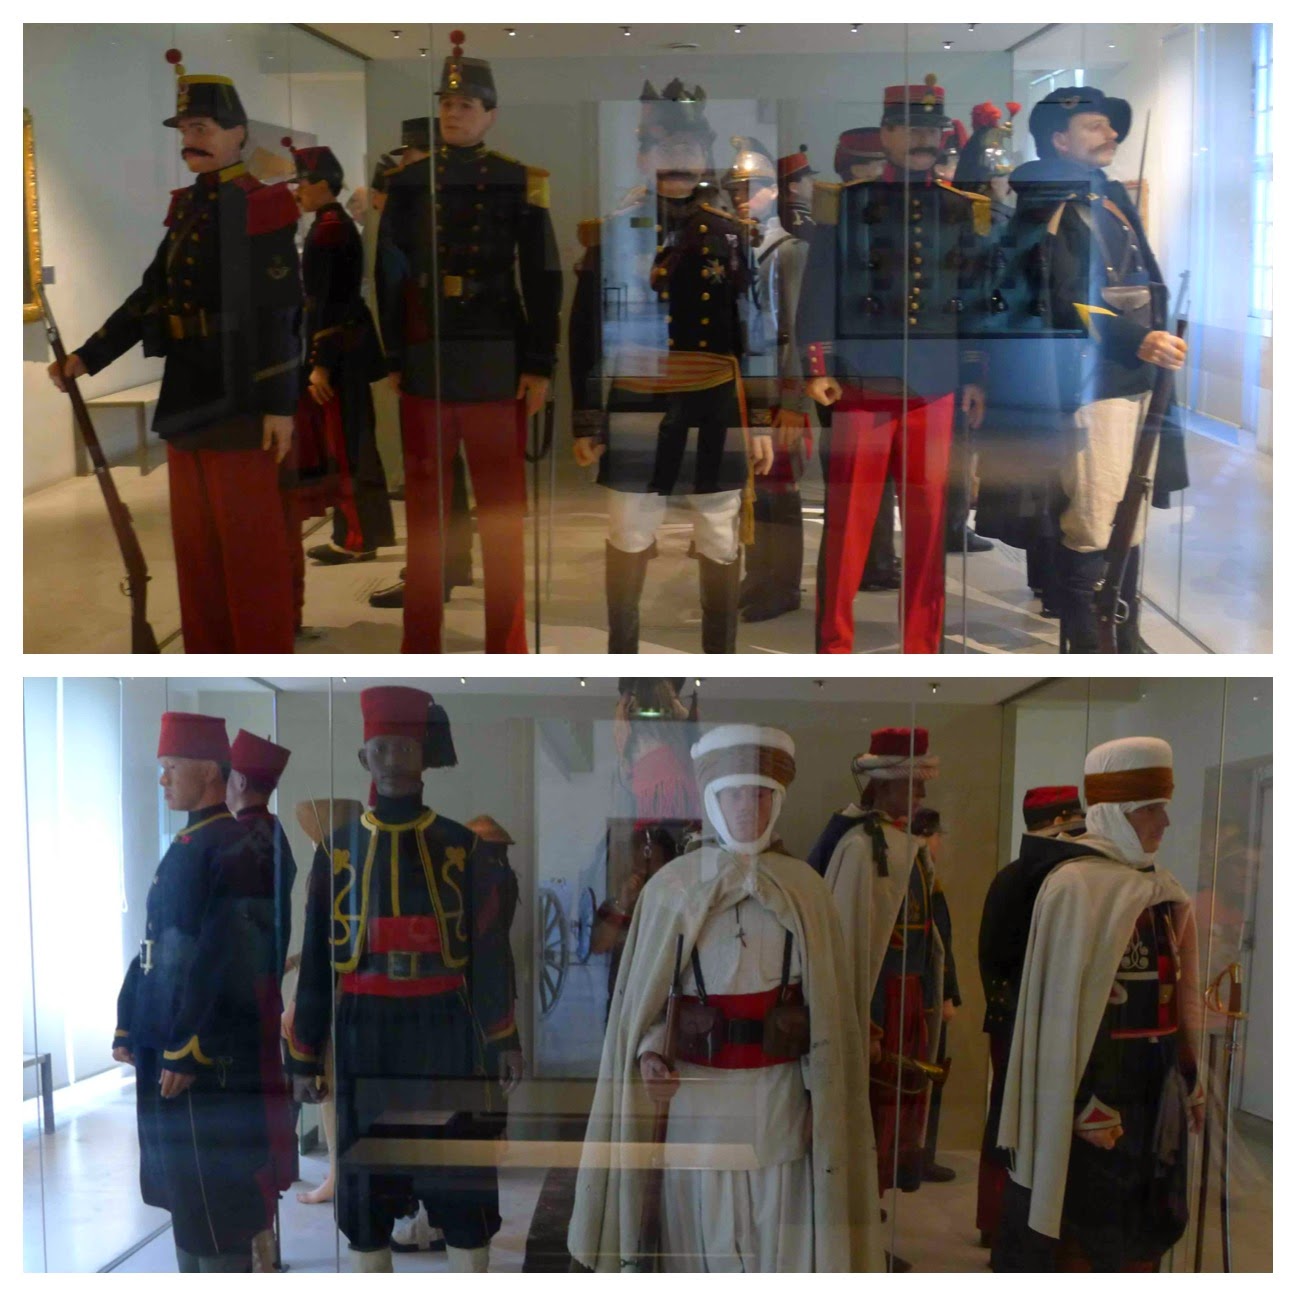 Prussian and Algerian Uniforms